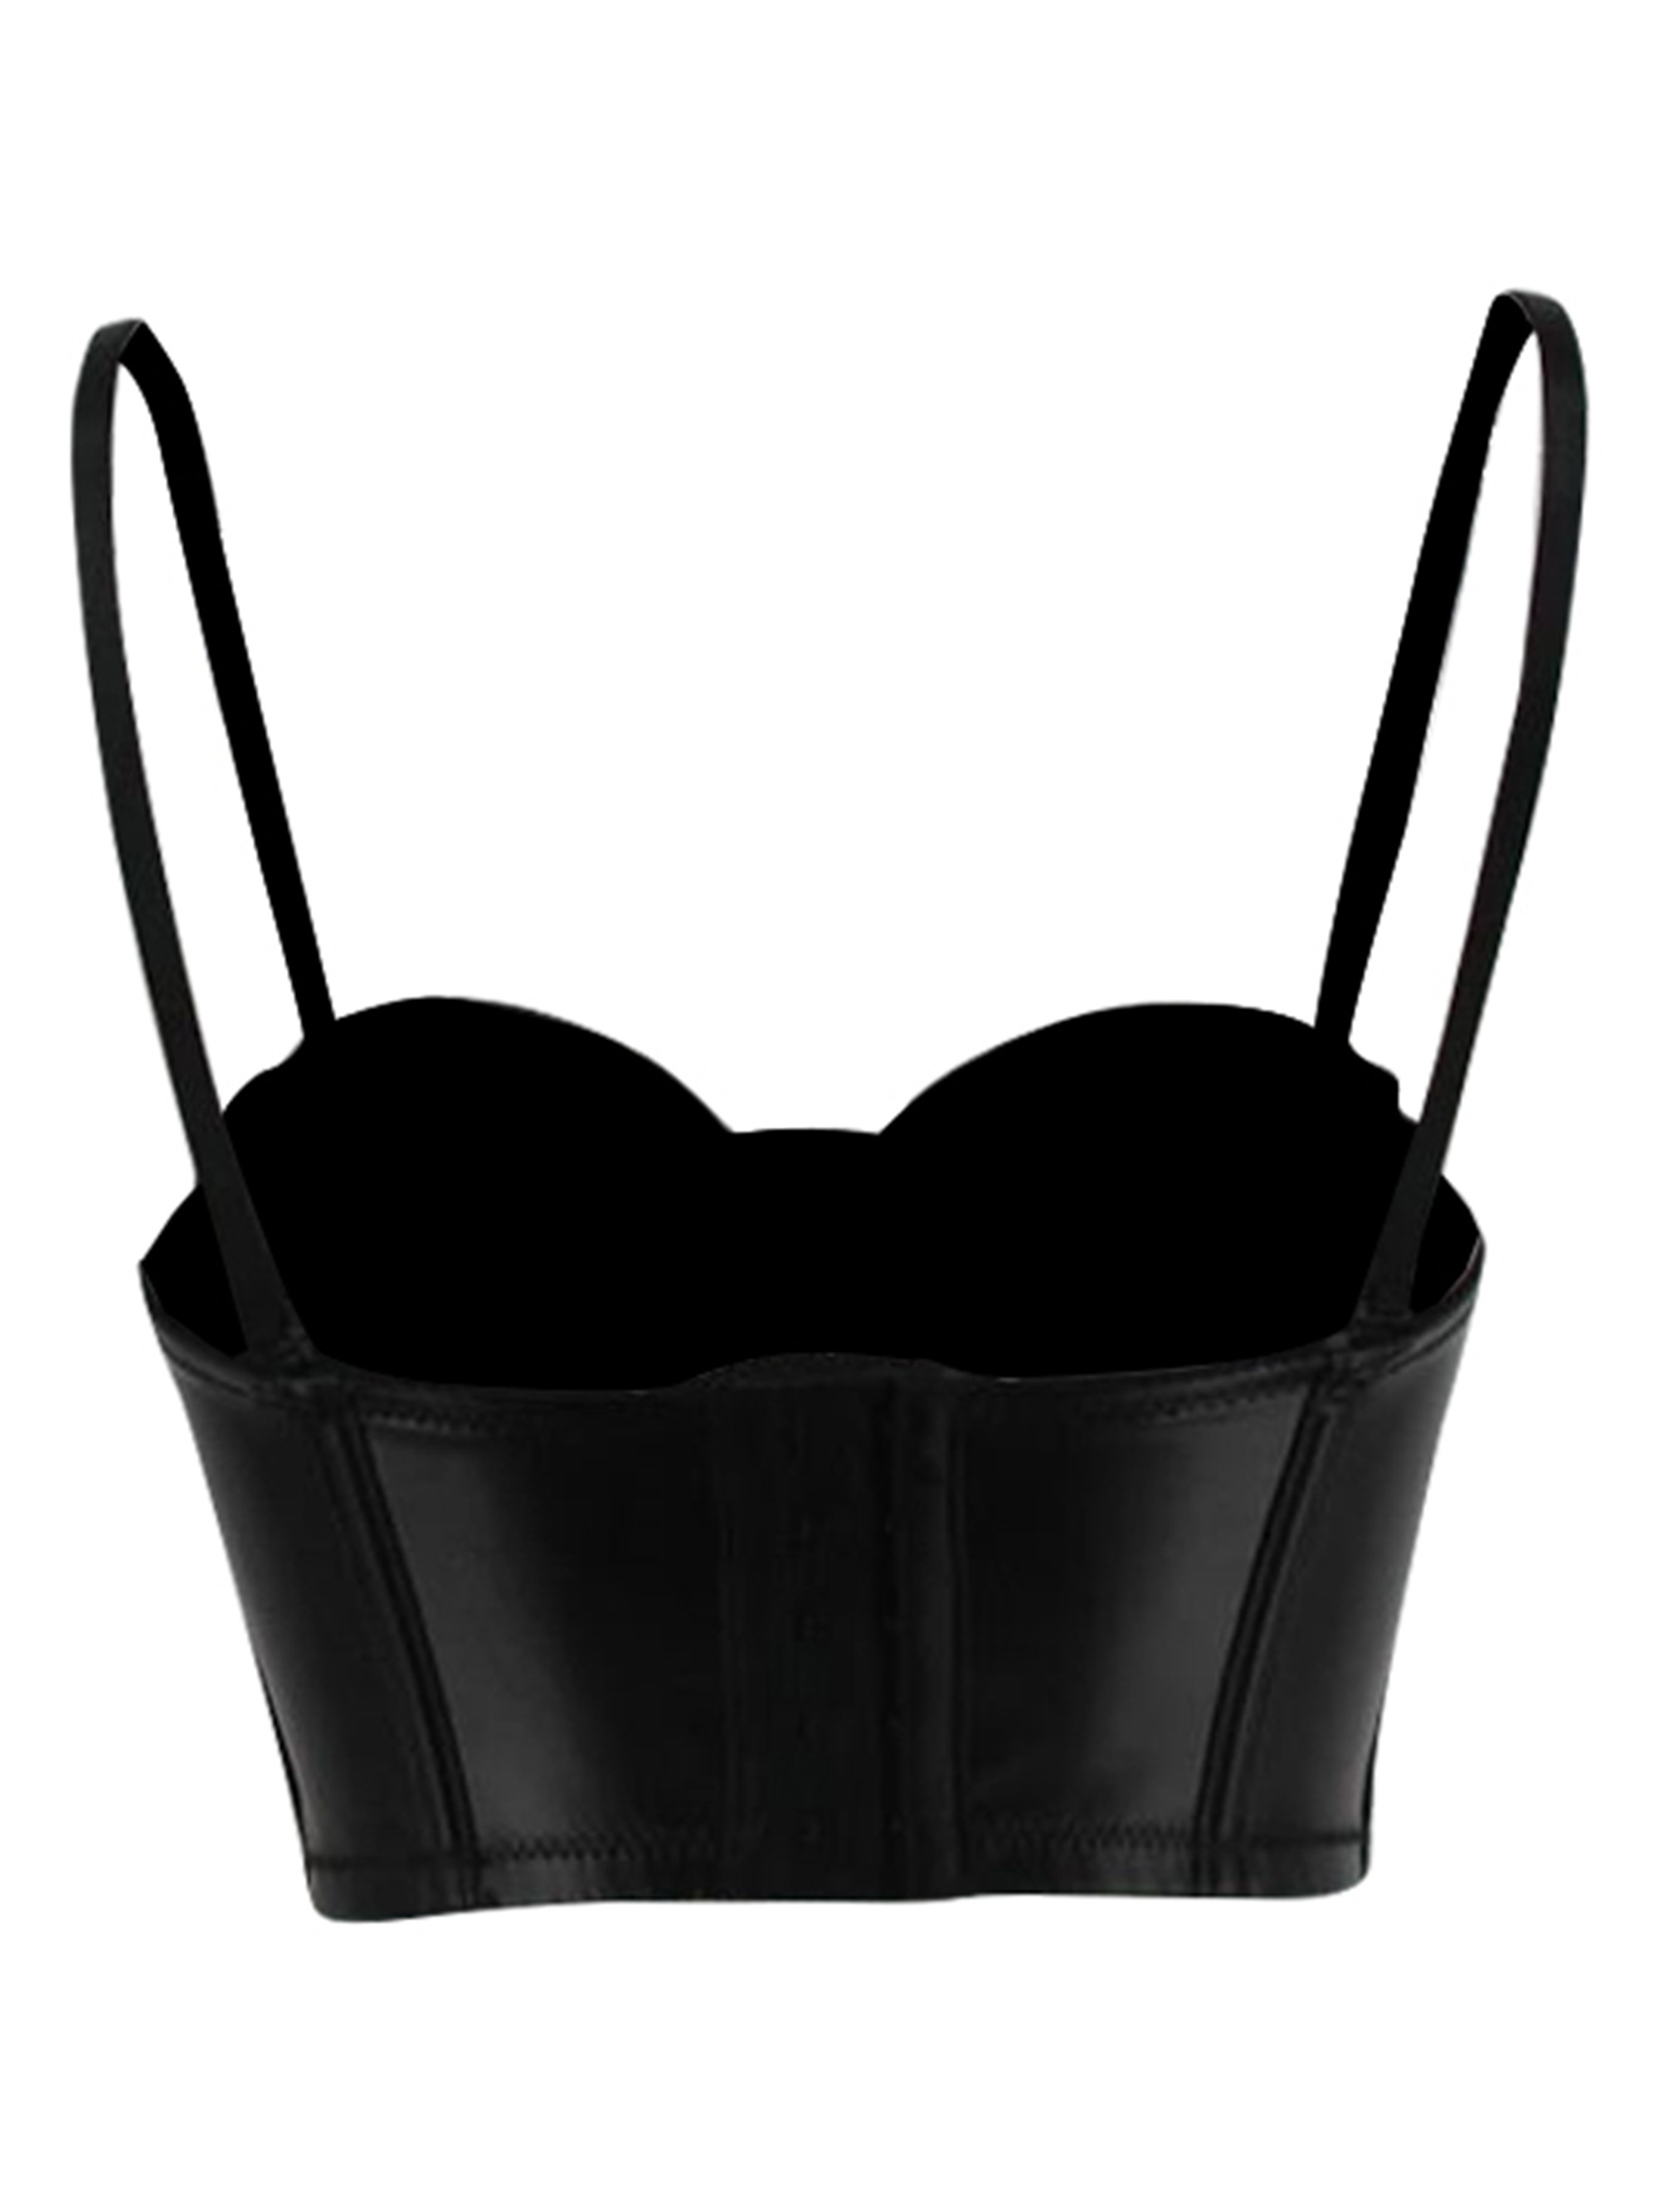 MISS MOLY Womens PU Leather Bustier Crop Top Gothic Punk Push Up